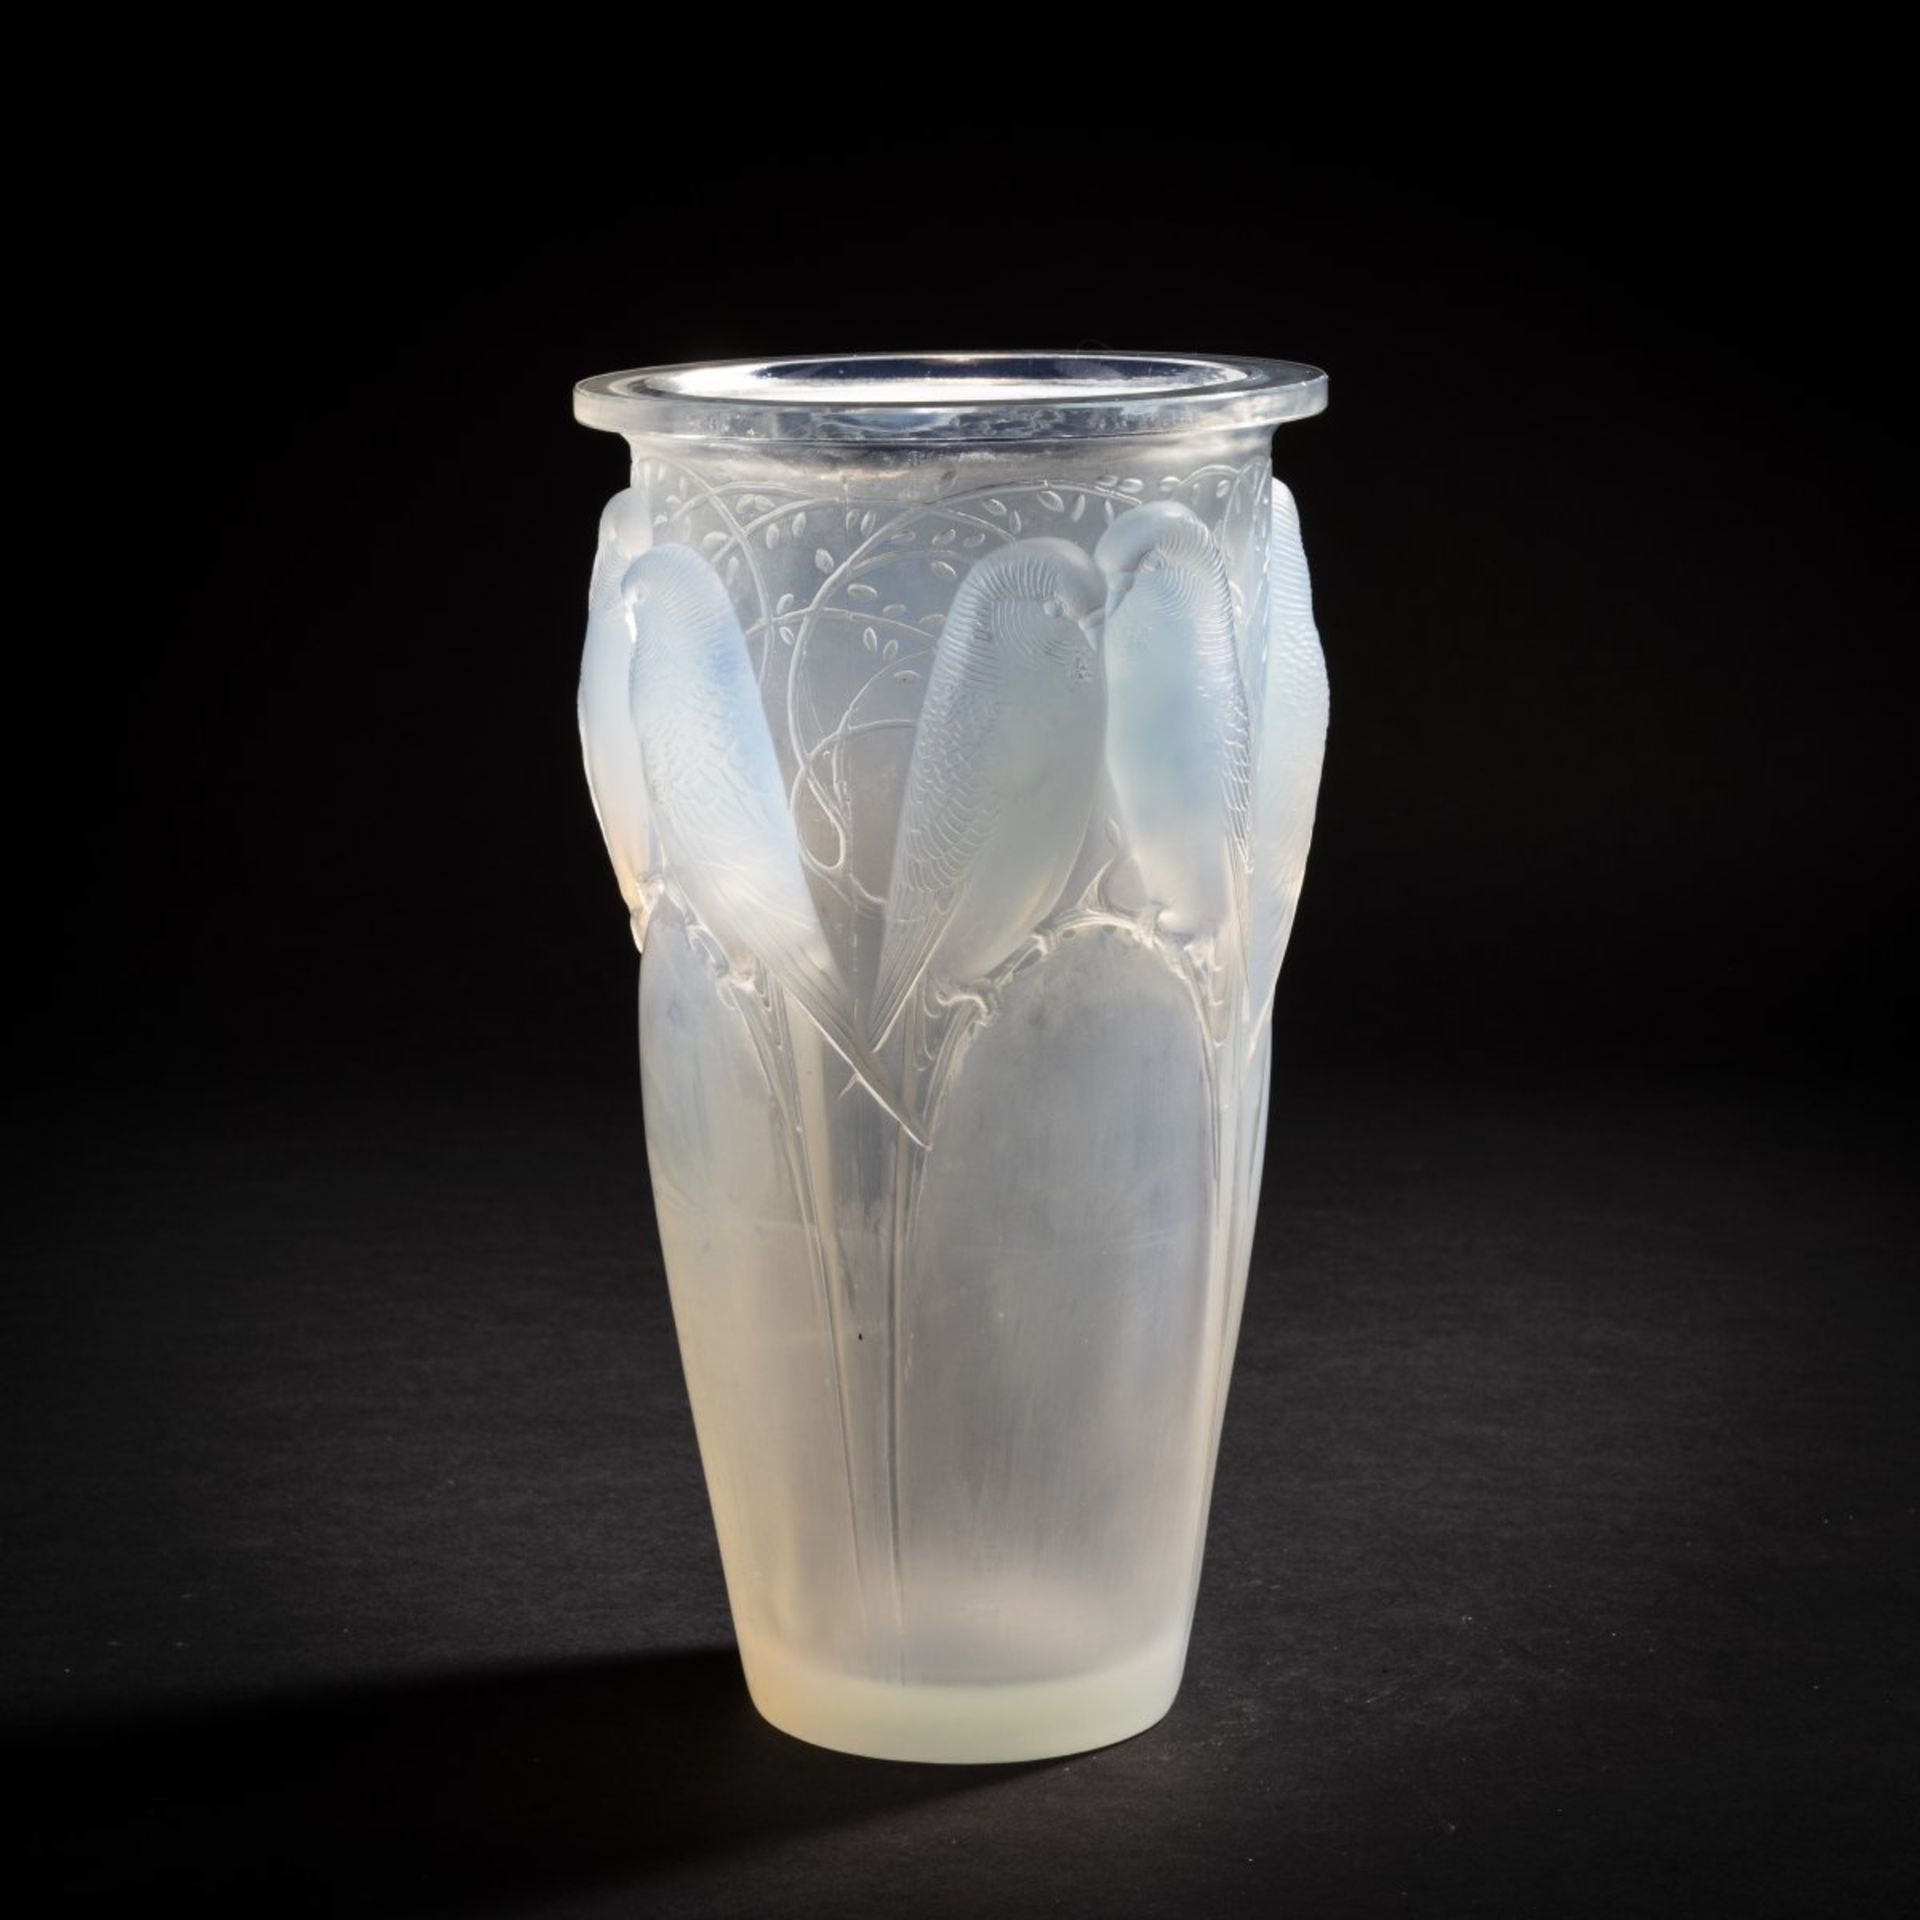 René Lalique, 'Ceylan' vase, 1924'Ceylan' vase, 1924H. 24.3 cm. Clear, moulded glass, satined and - Image 4 of 10